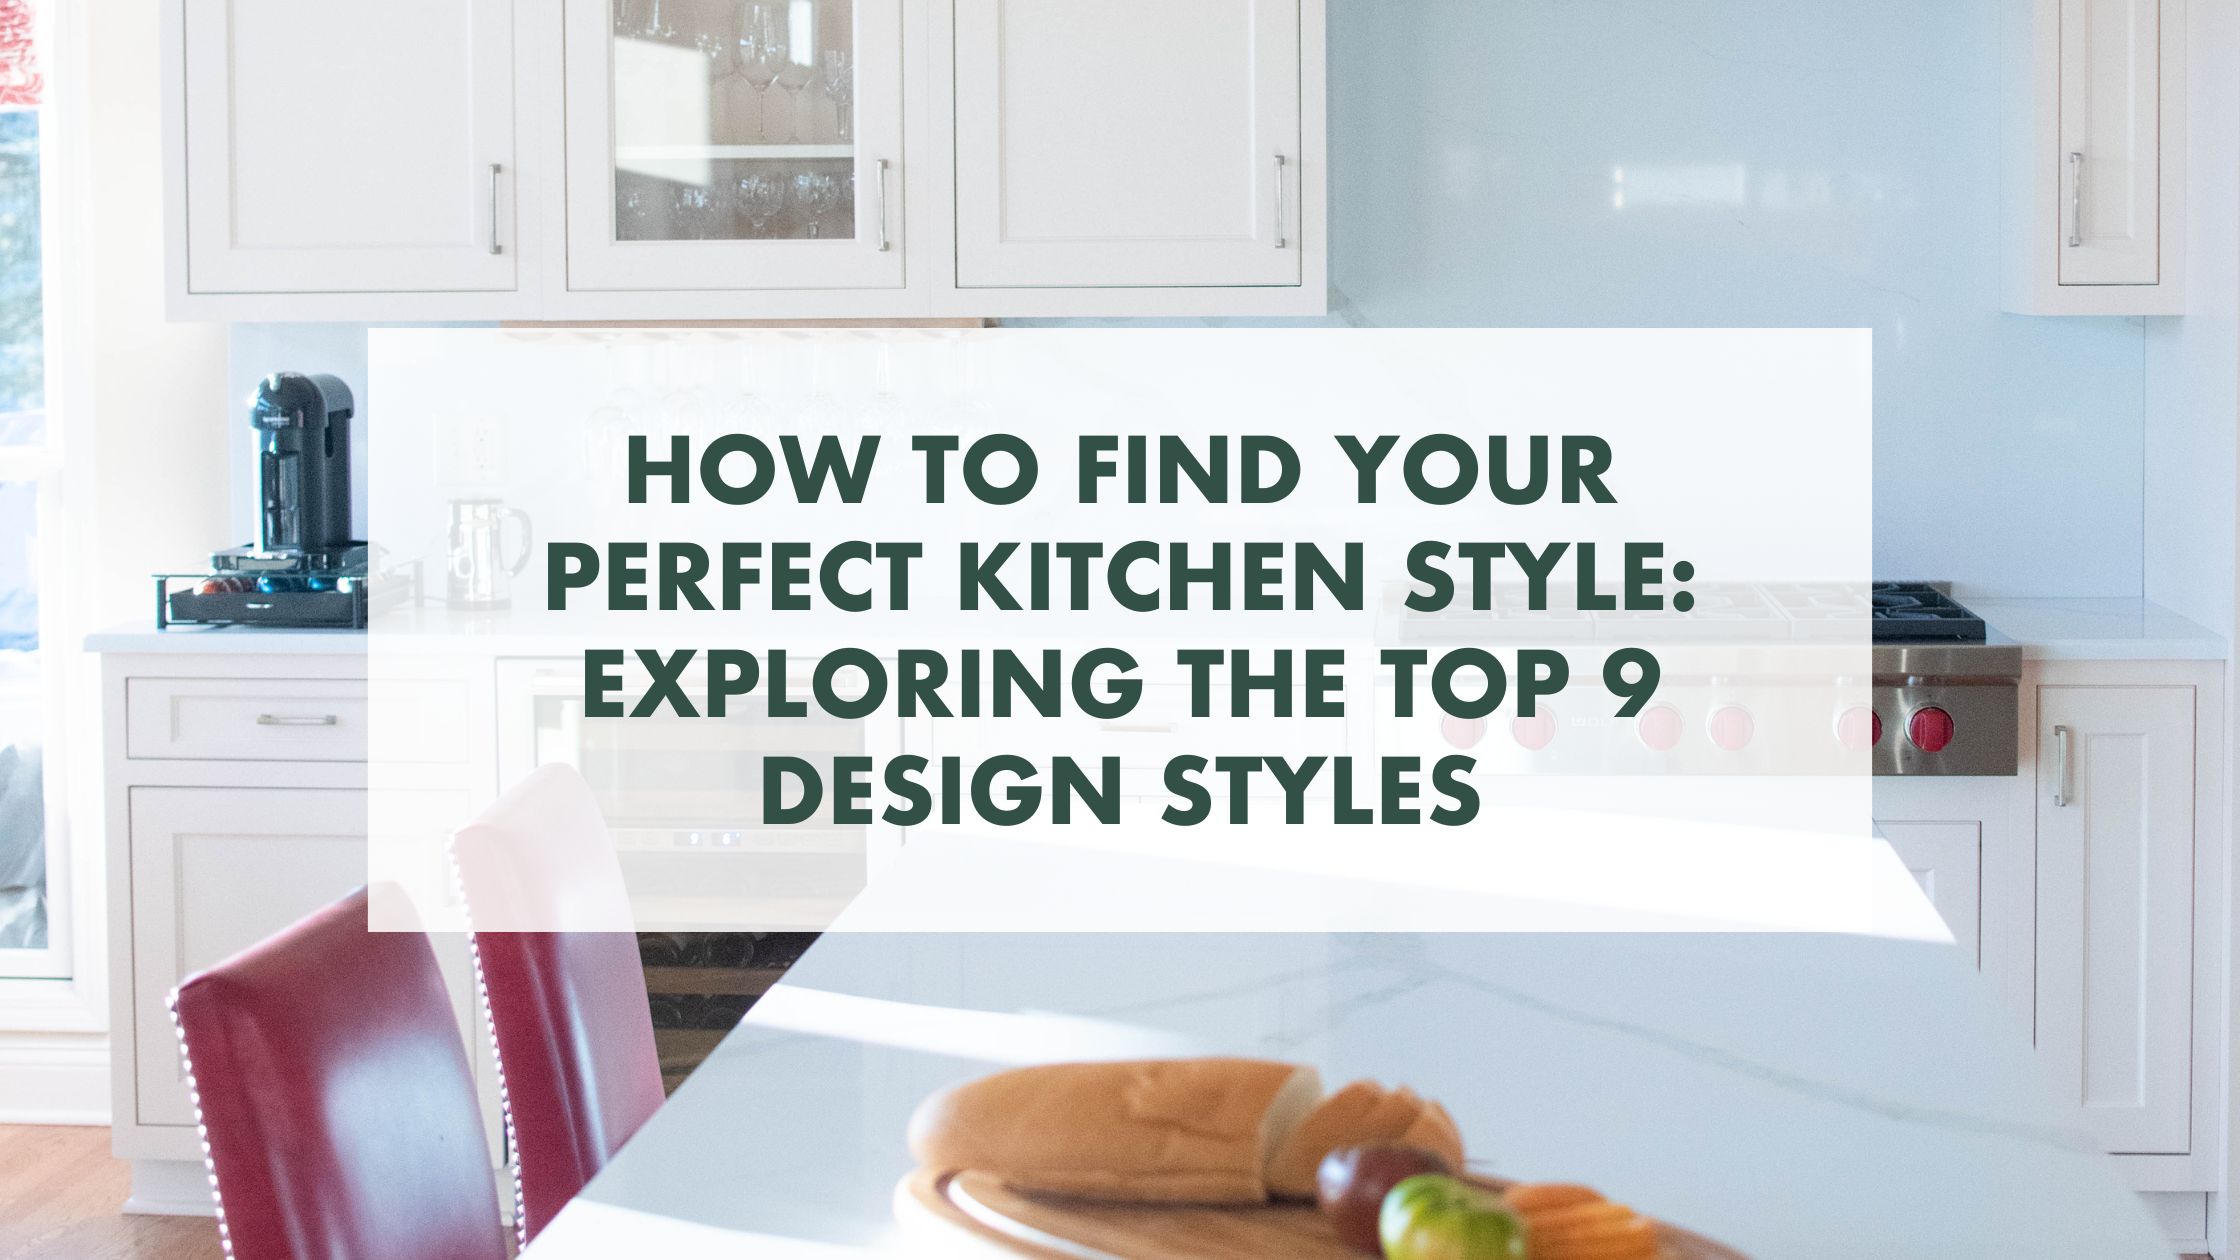 How to Find Your Perfect Kitchen Style: Exploring the Top 9 Design Styles